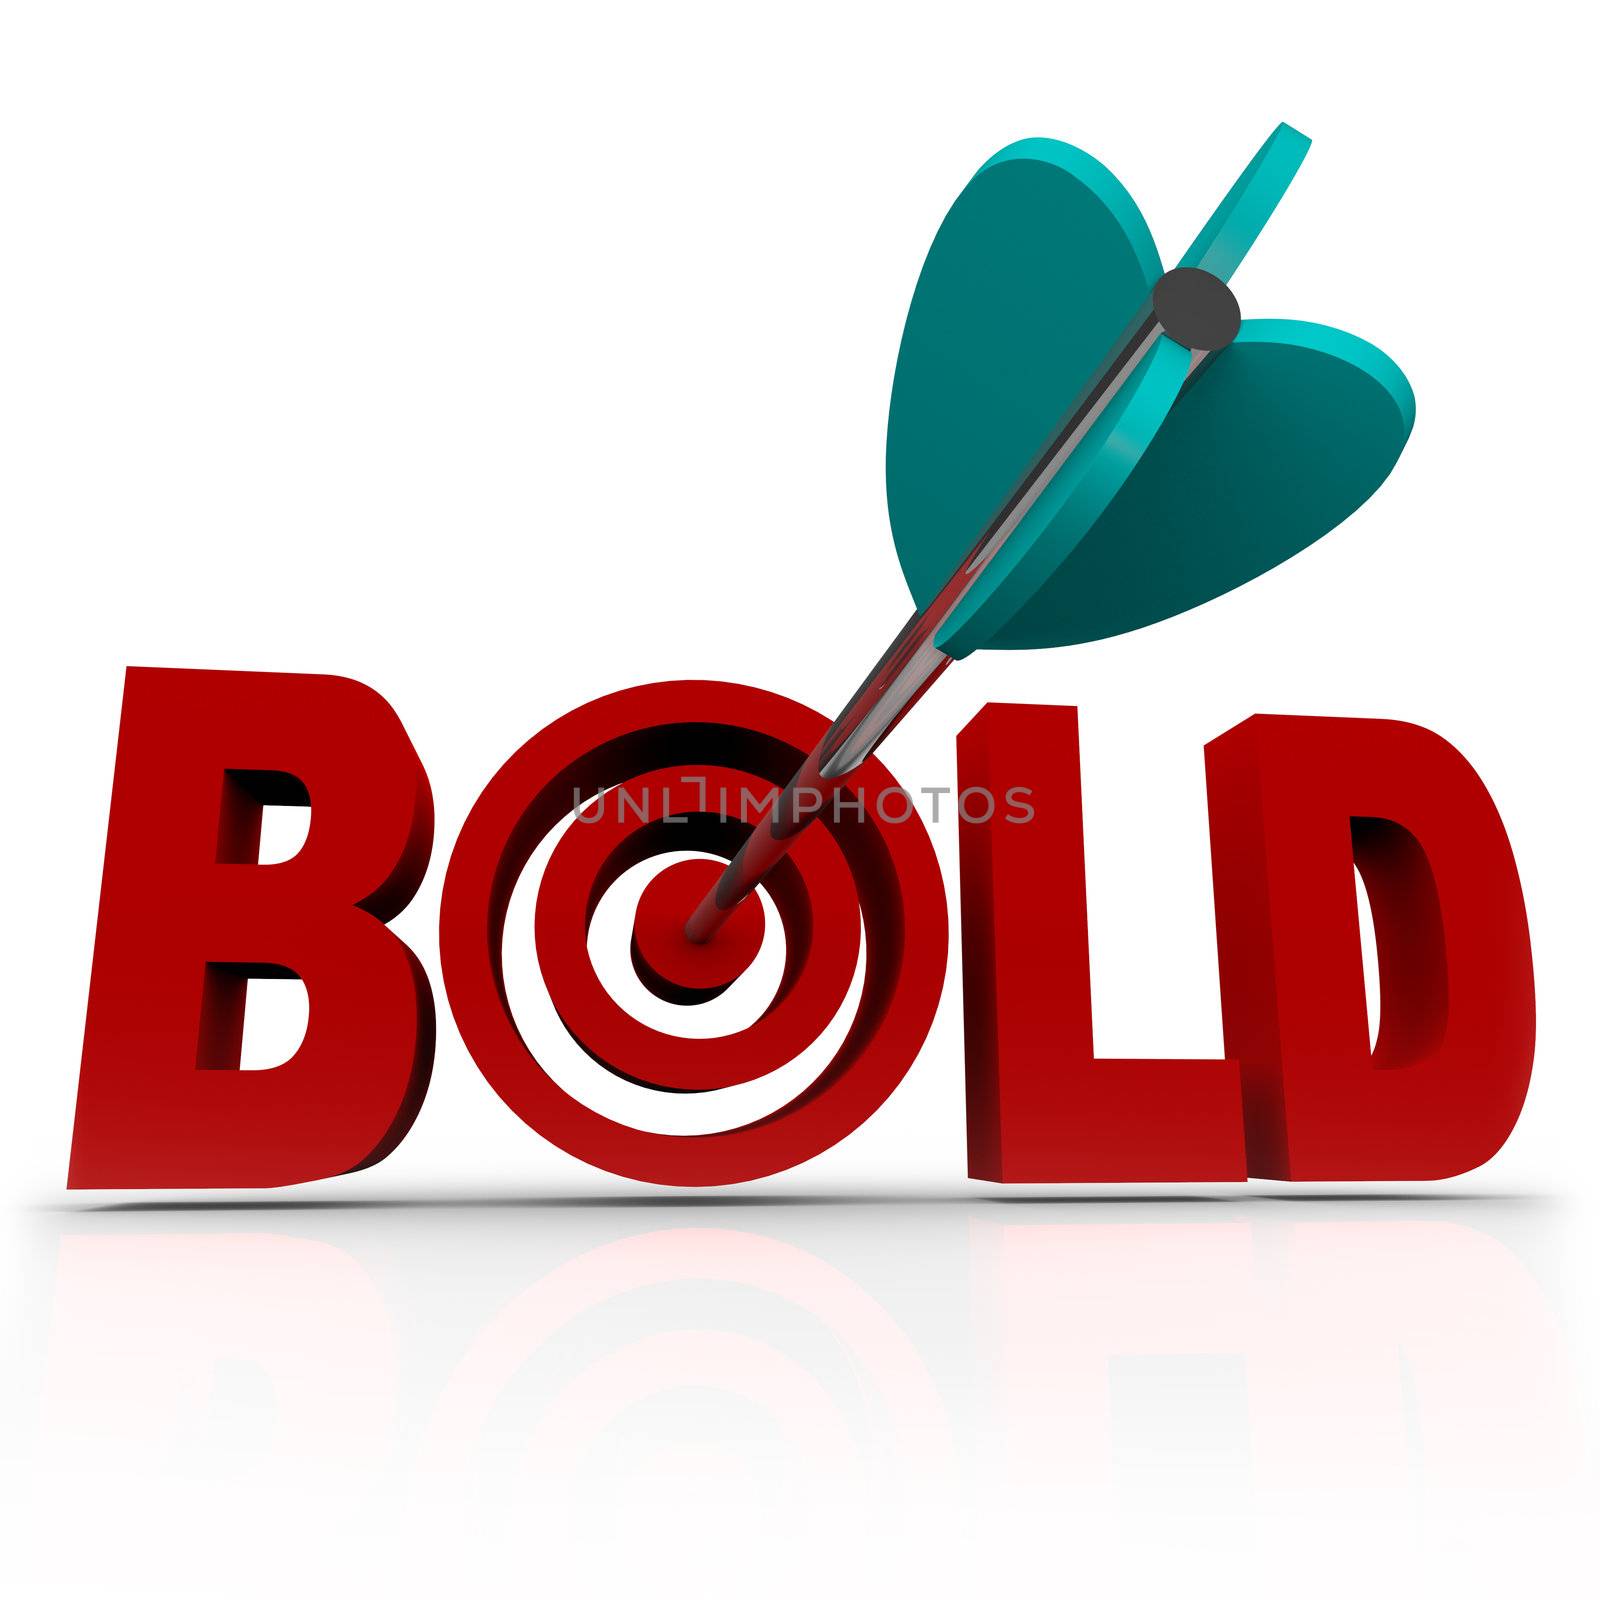 Bold - Arrow in Word Bullseye - Be Aggressive by iQoncept